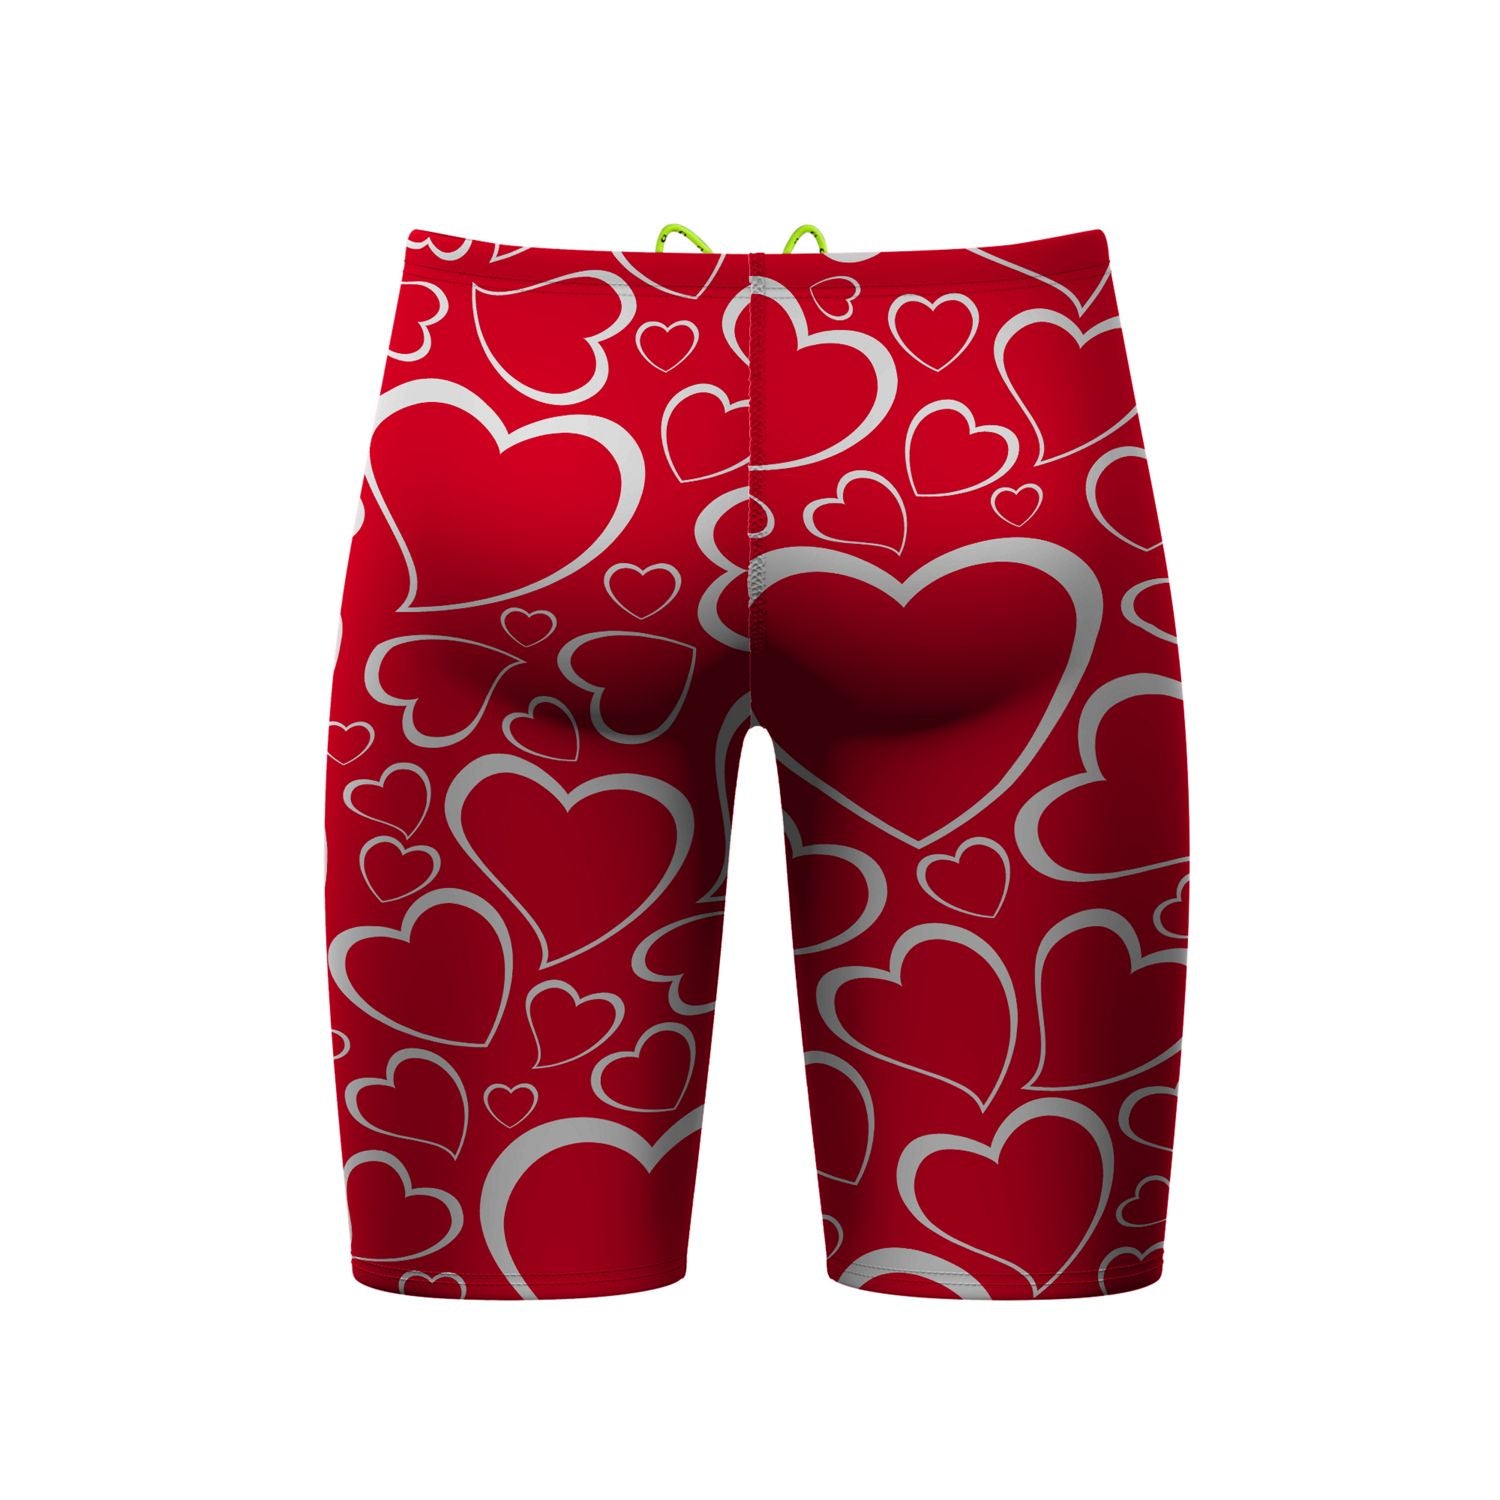 Double Hearted Jammer Swimsuit – Q Swimwear